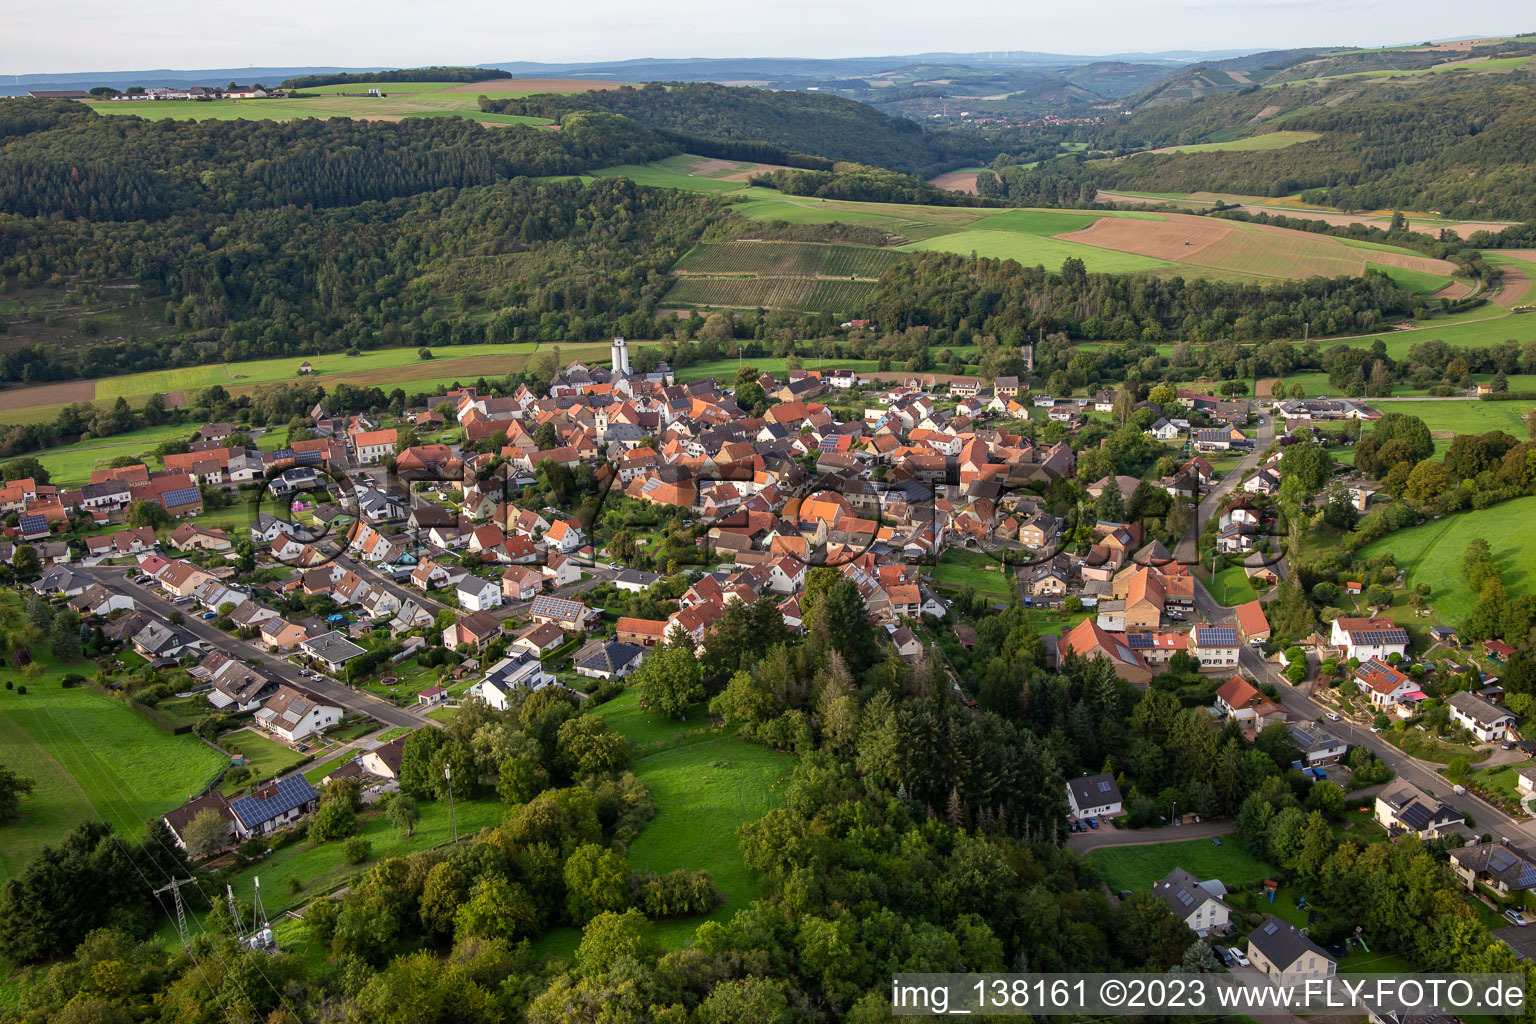 From the south in Rehborn in the state Rhineland-Palatinate, Germany